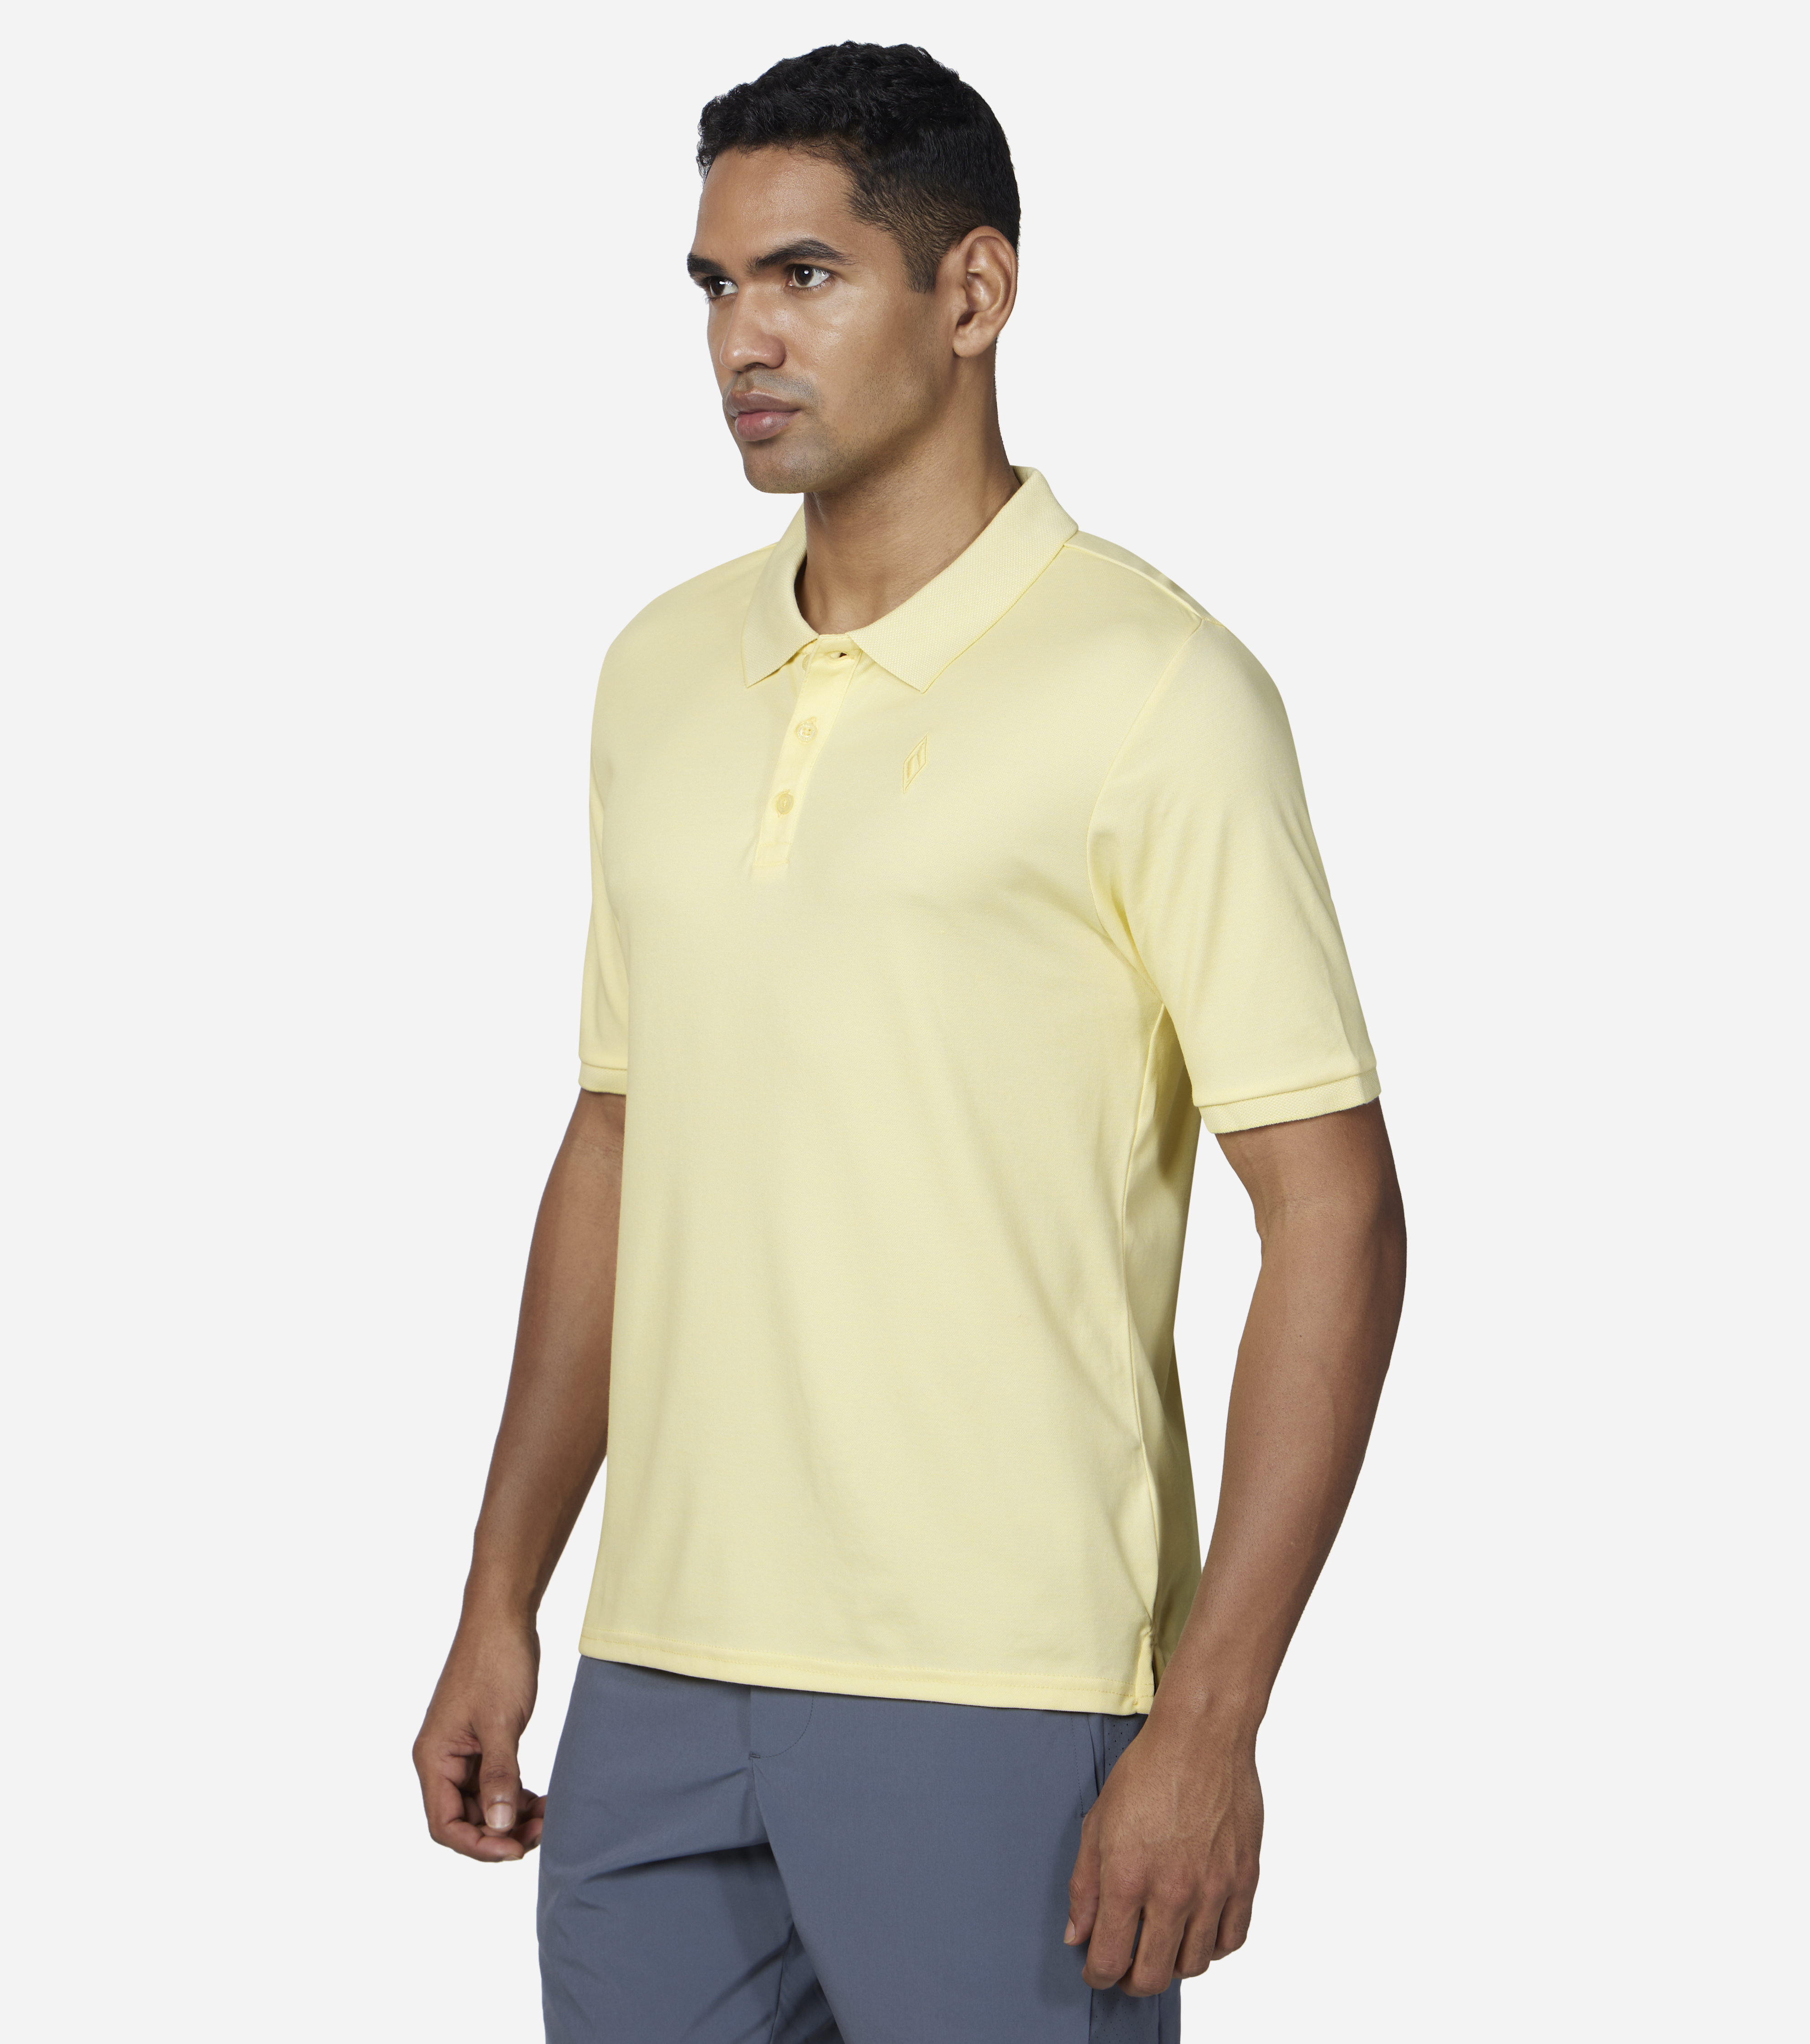 OFF DUTY POLO, LIGHT GREY/YELLOW Apparels Top View